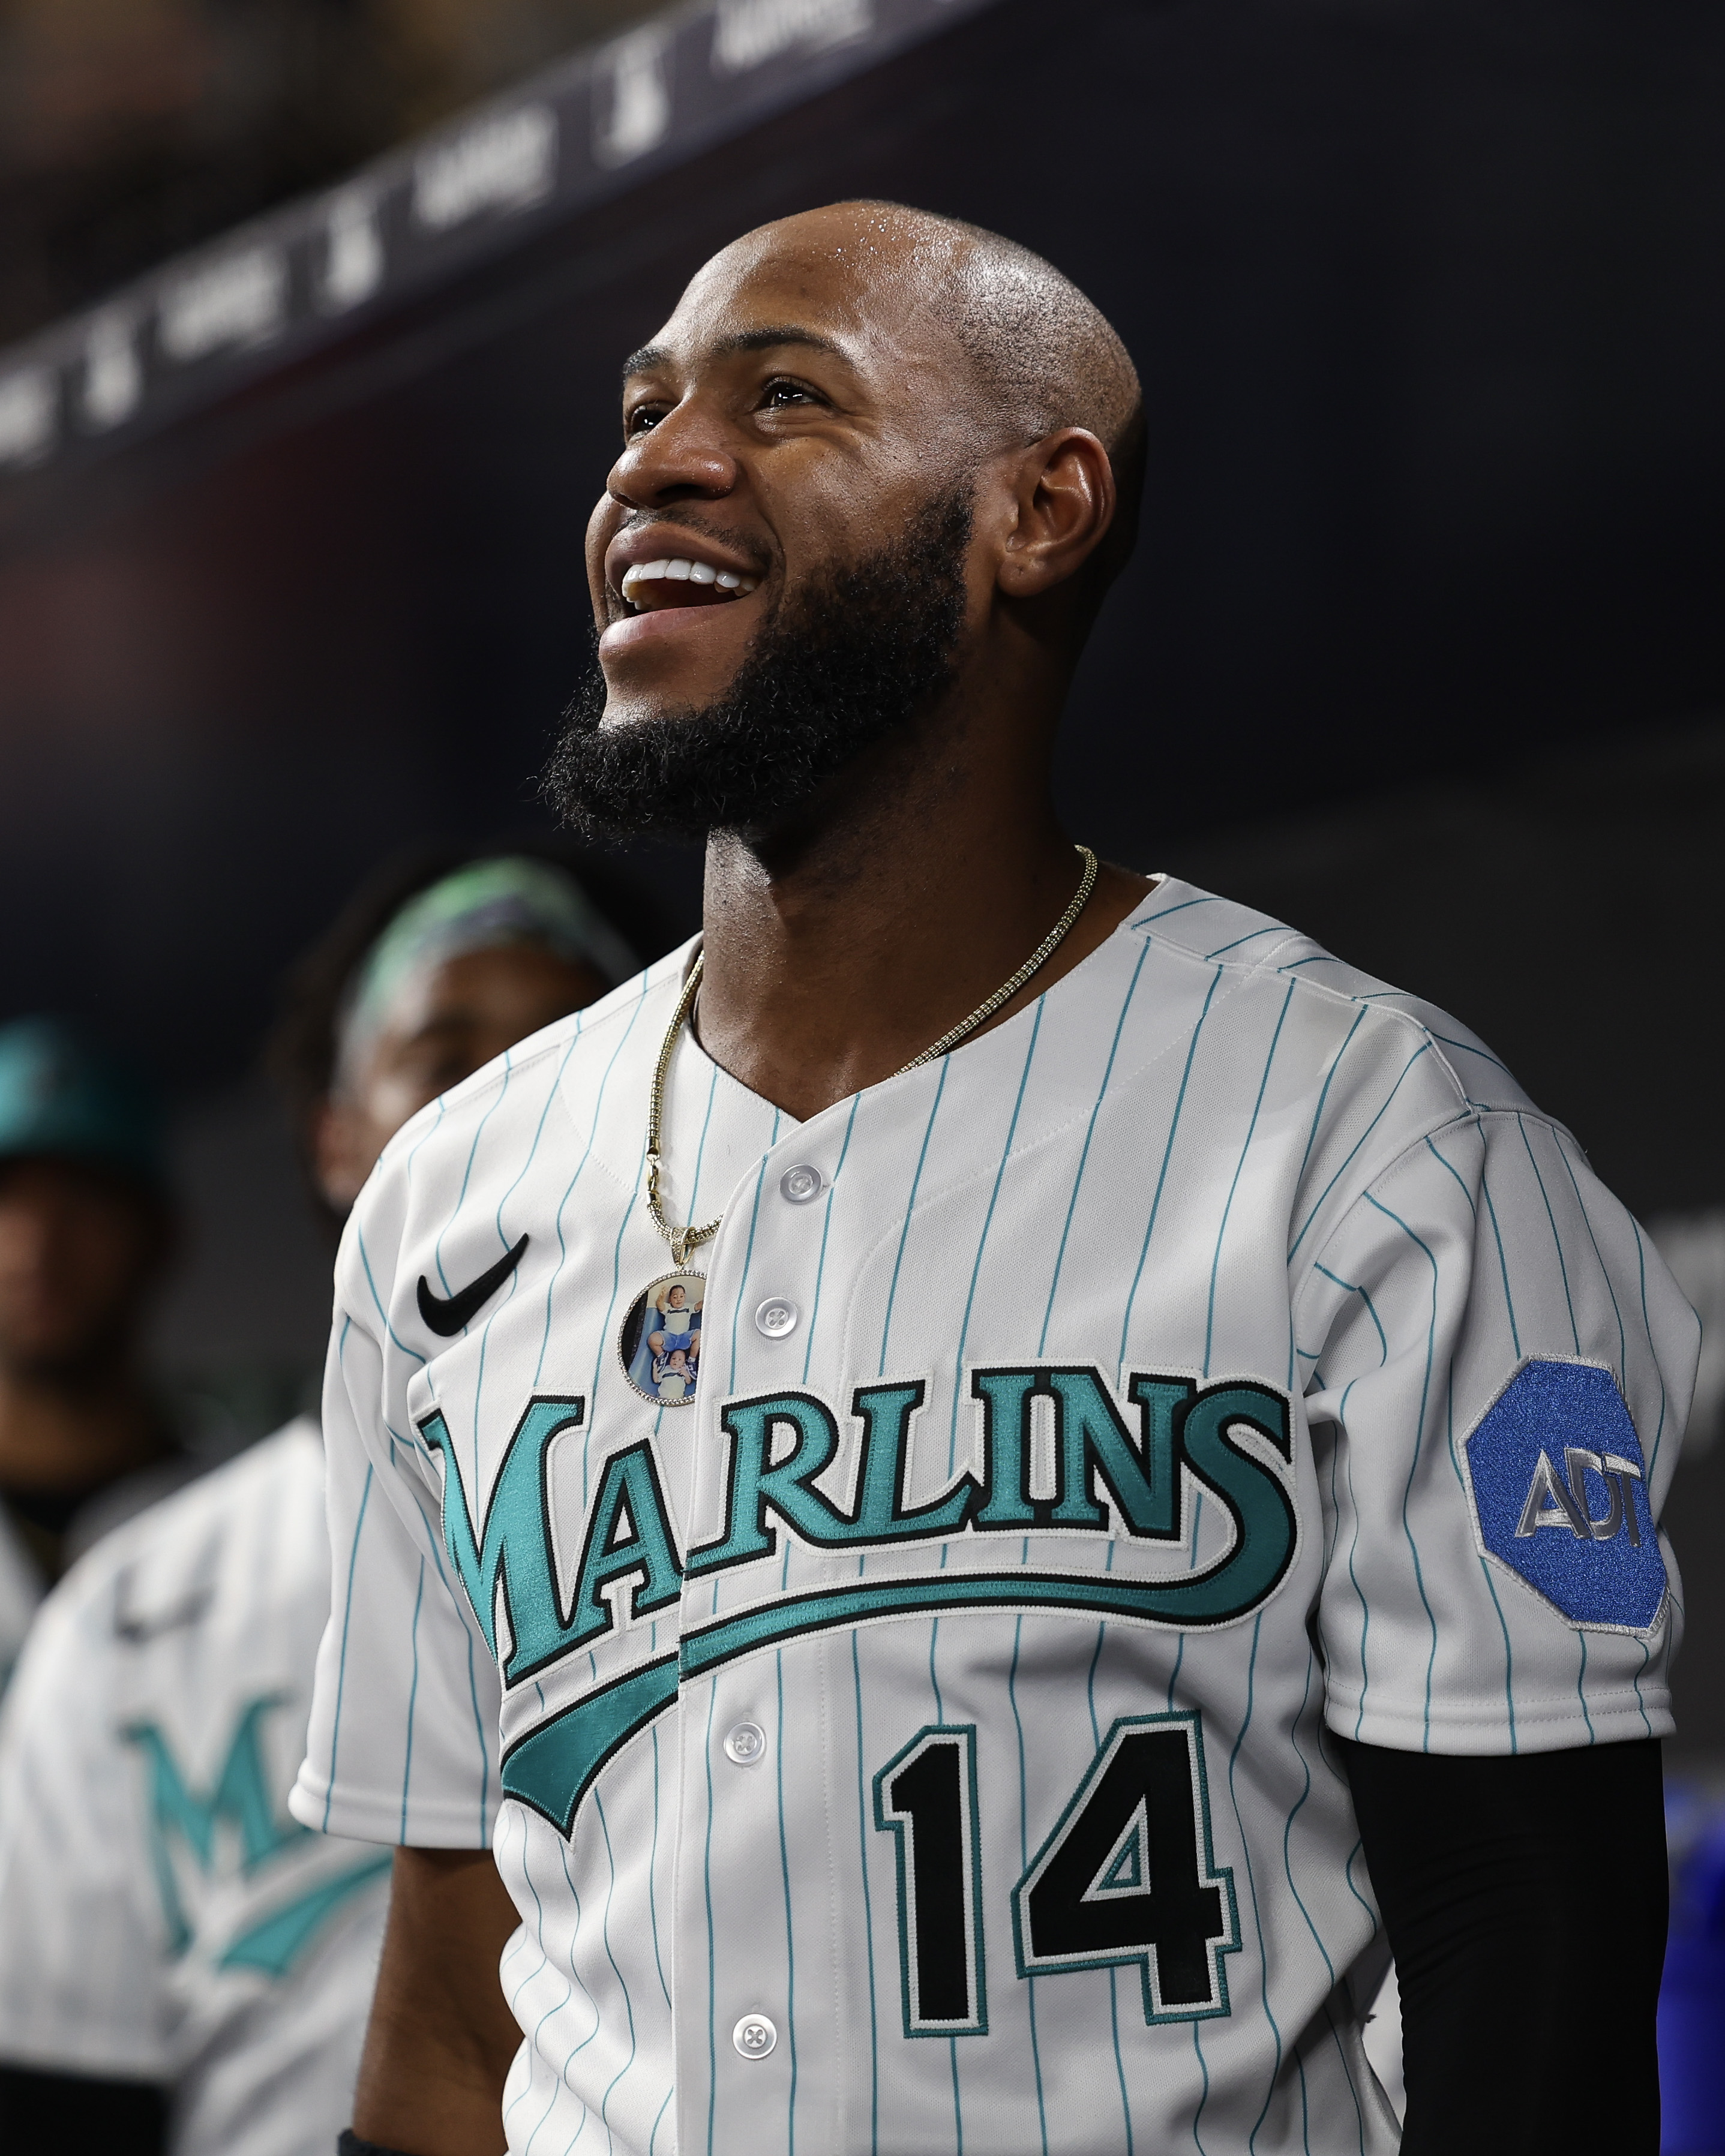 Bryan De La Cruz #14 of the Miami Marlins smiles after a homerun in the sixth inning against the Cincinnati Reds at loanDepot park on May 12, 2023 in Miami, Florida.